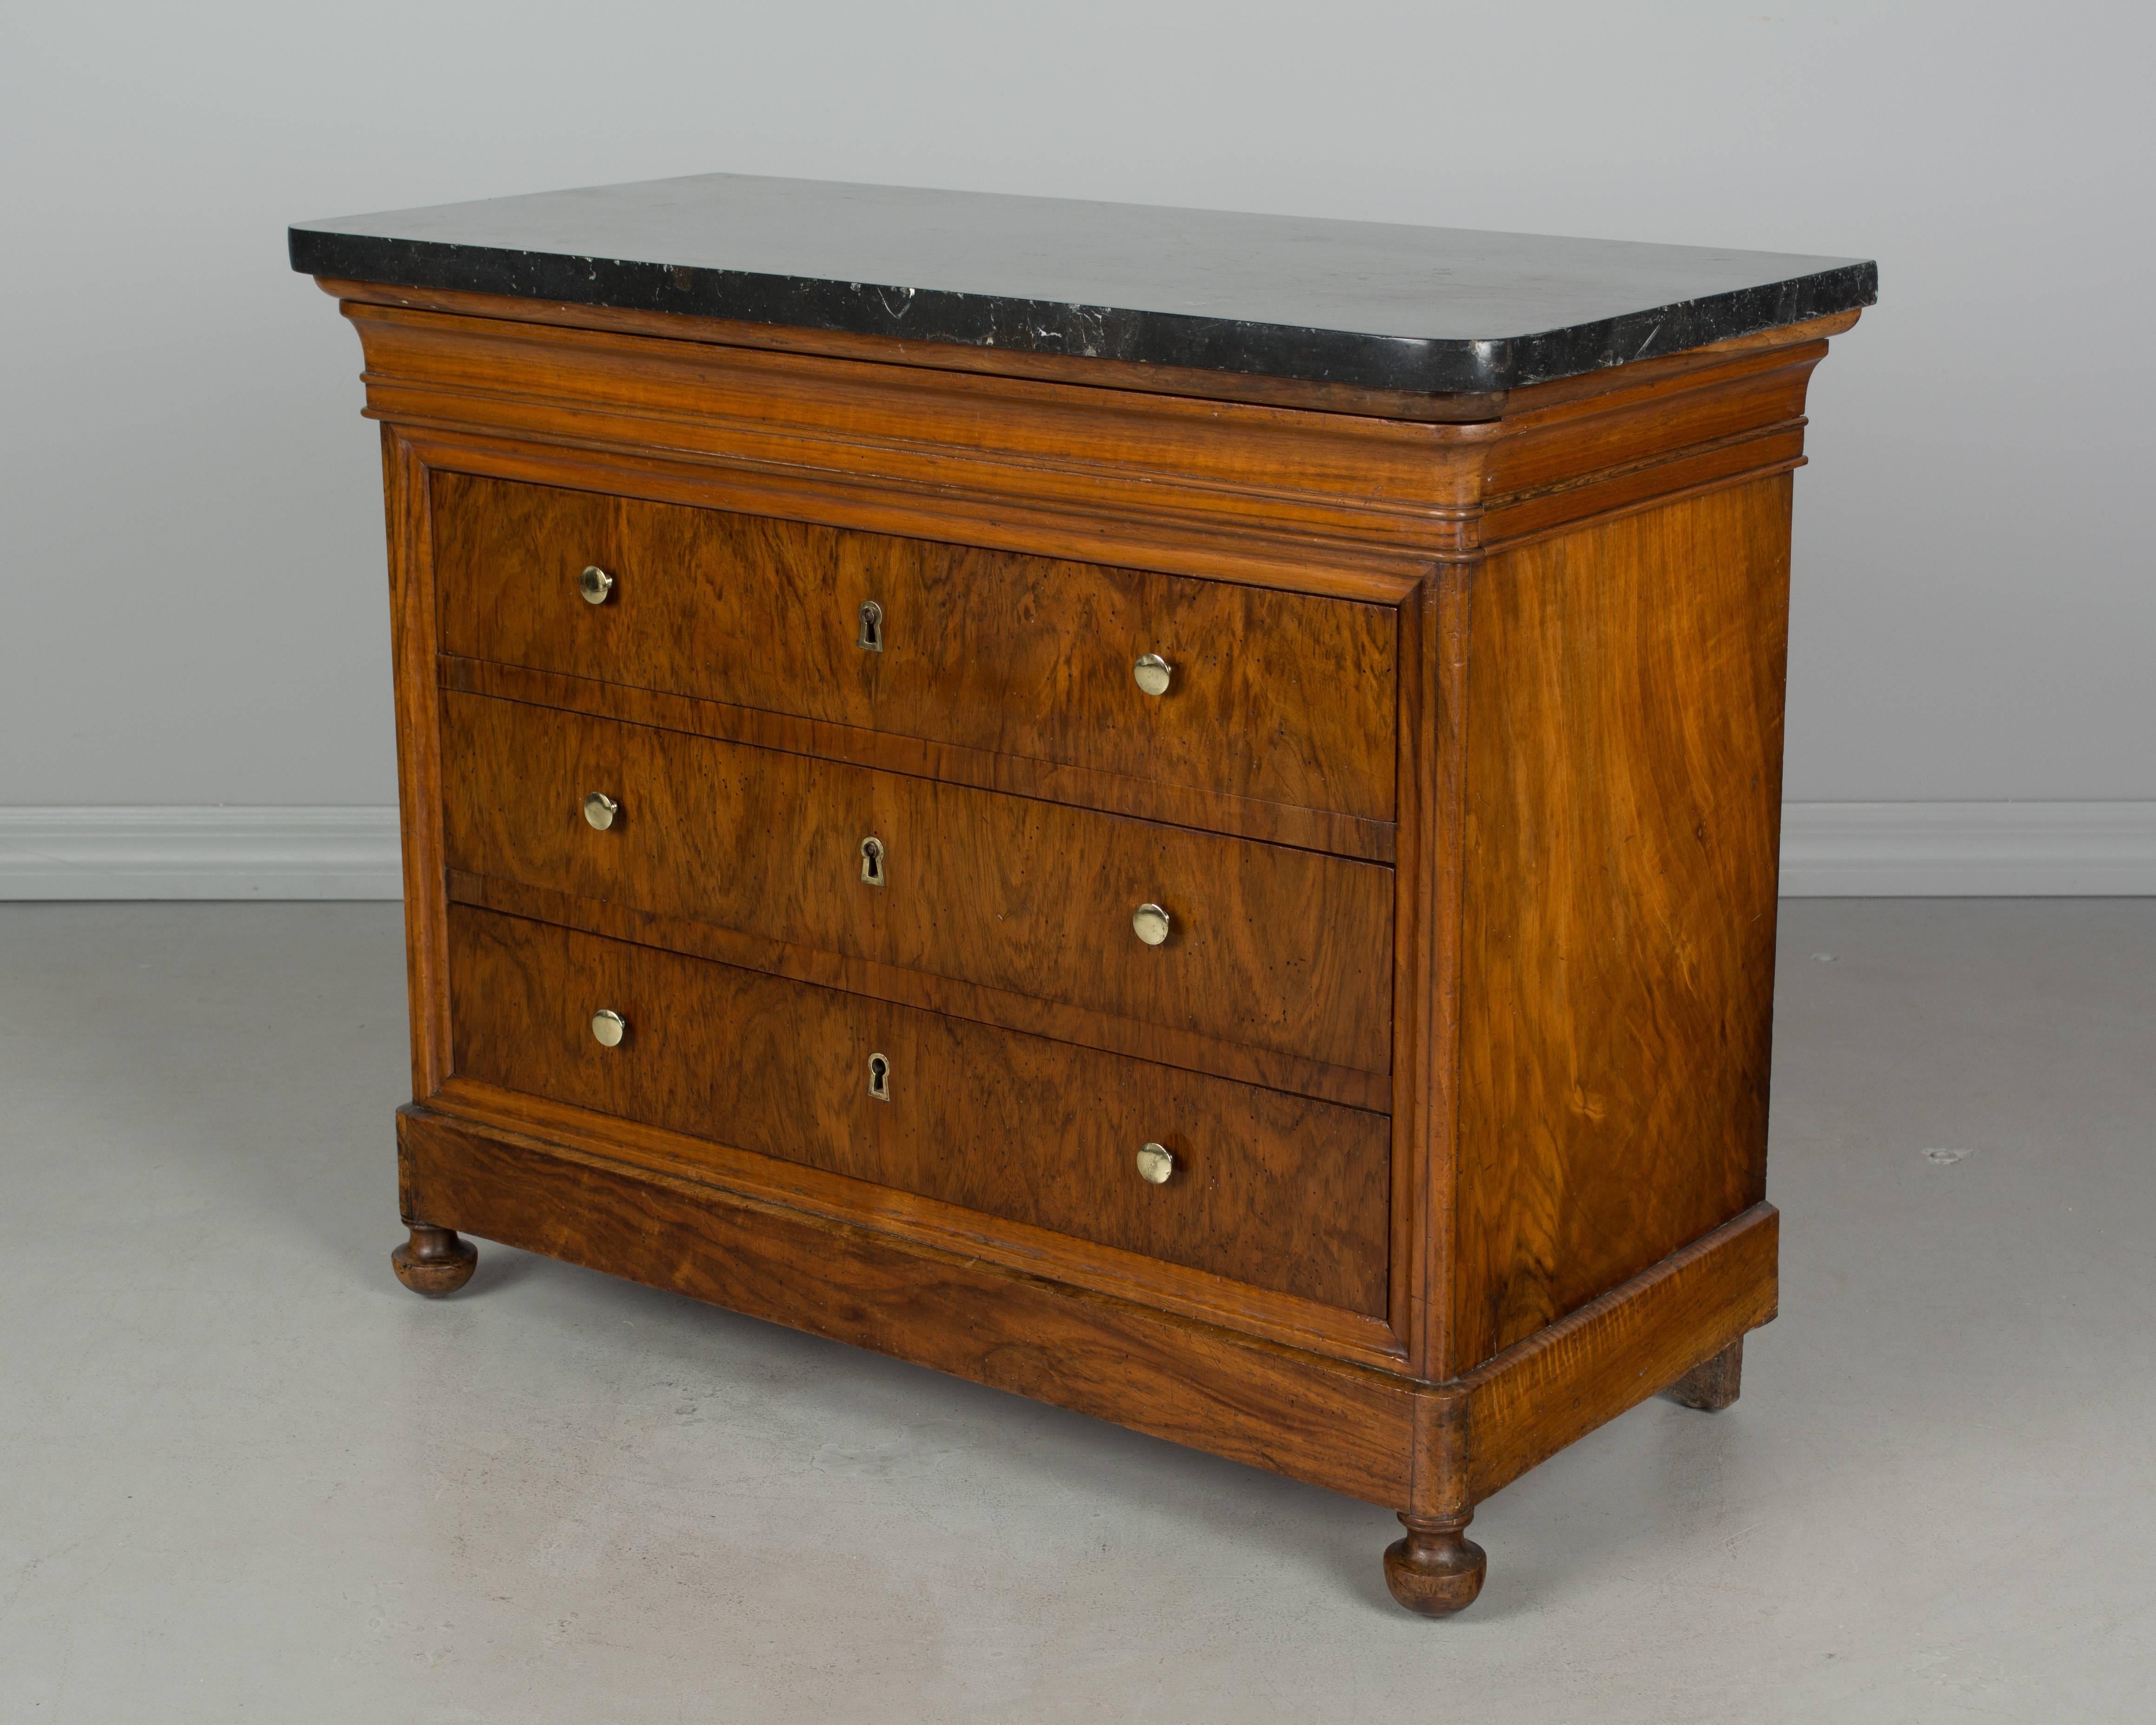 A small 19th century, French, Louis Philippe child's size commode with three dovetailed drawers and a hidden top drawer. Made of solid walnut with beautiful veneer of walnut on the face of the drawers. Pine as a secondary wood. Original brass knobs.